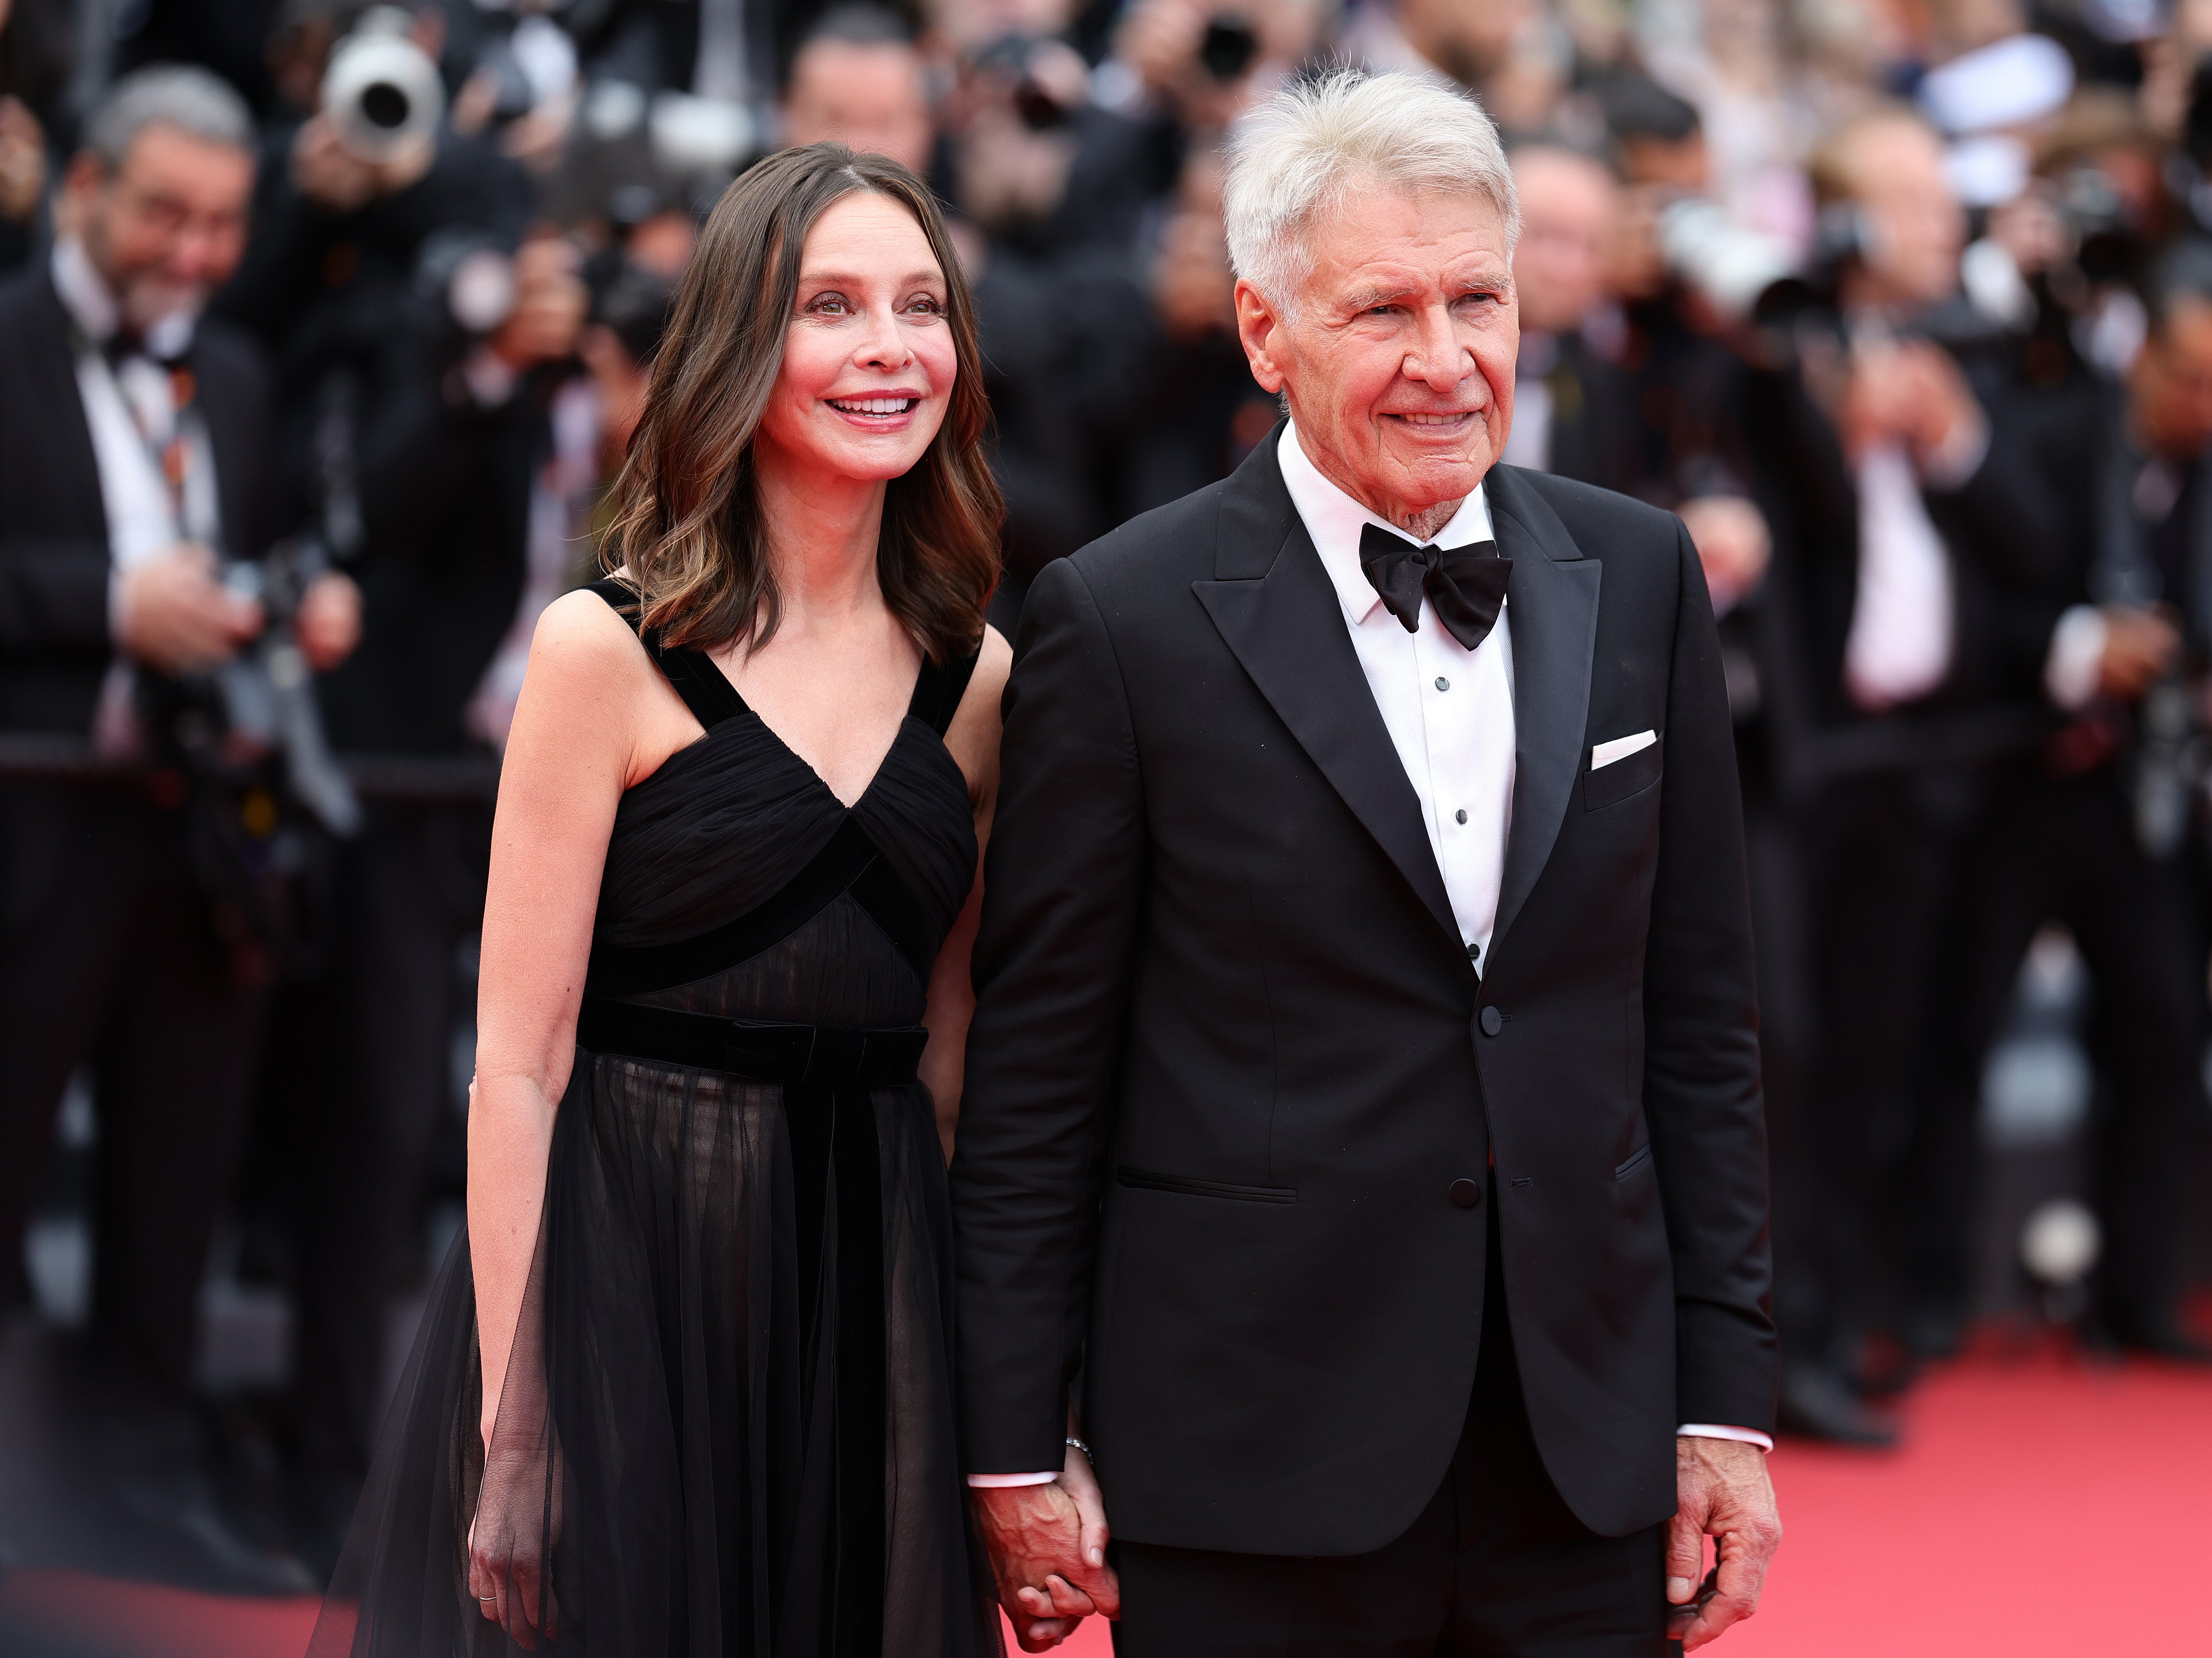 Harrison Ford and Calista Flockhart have been happily married for 13 years